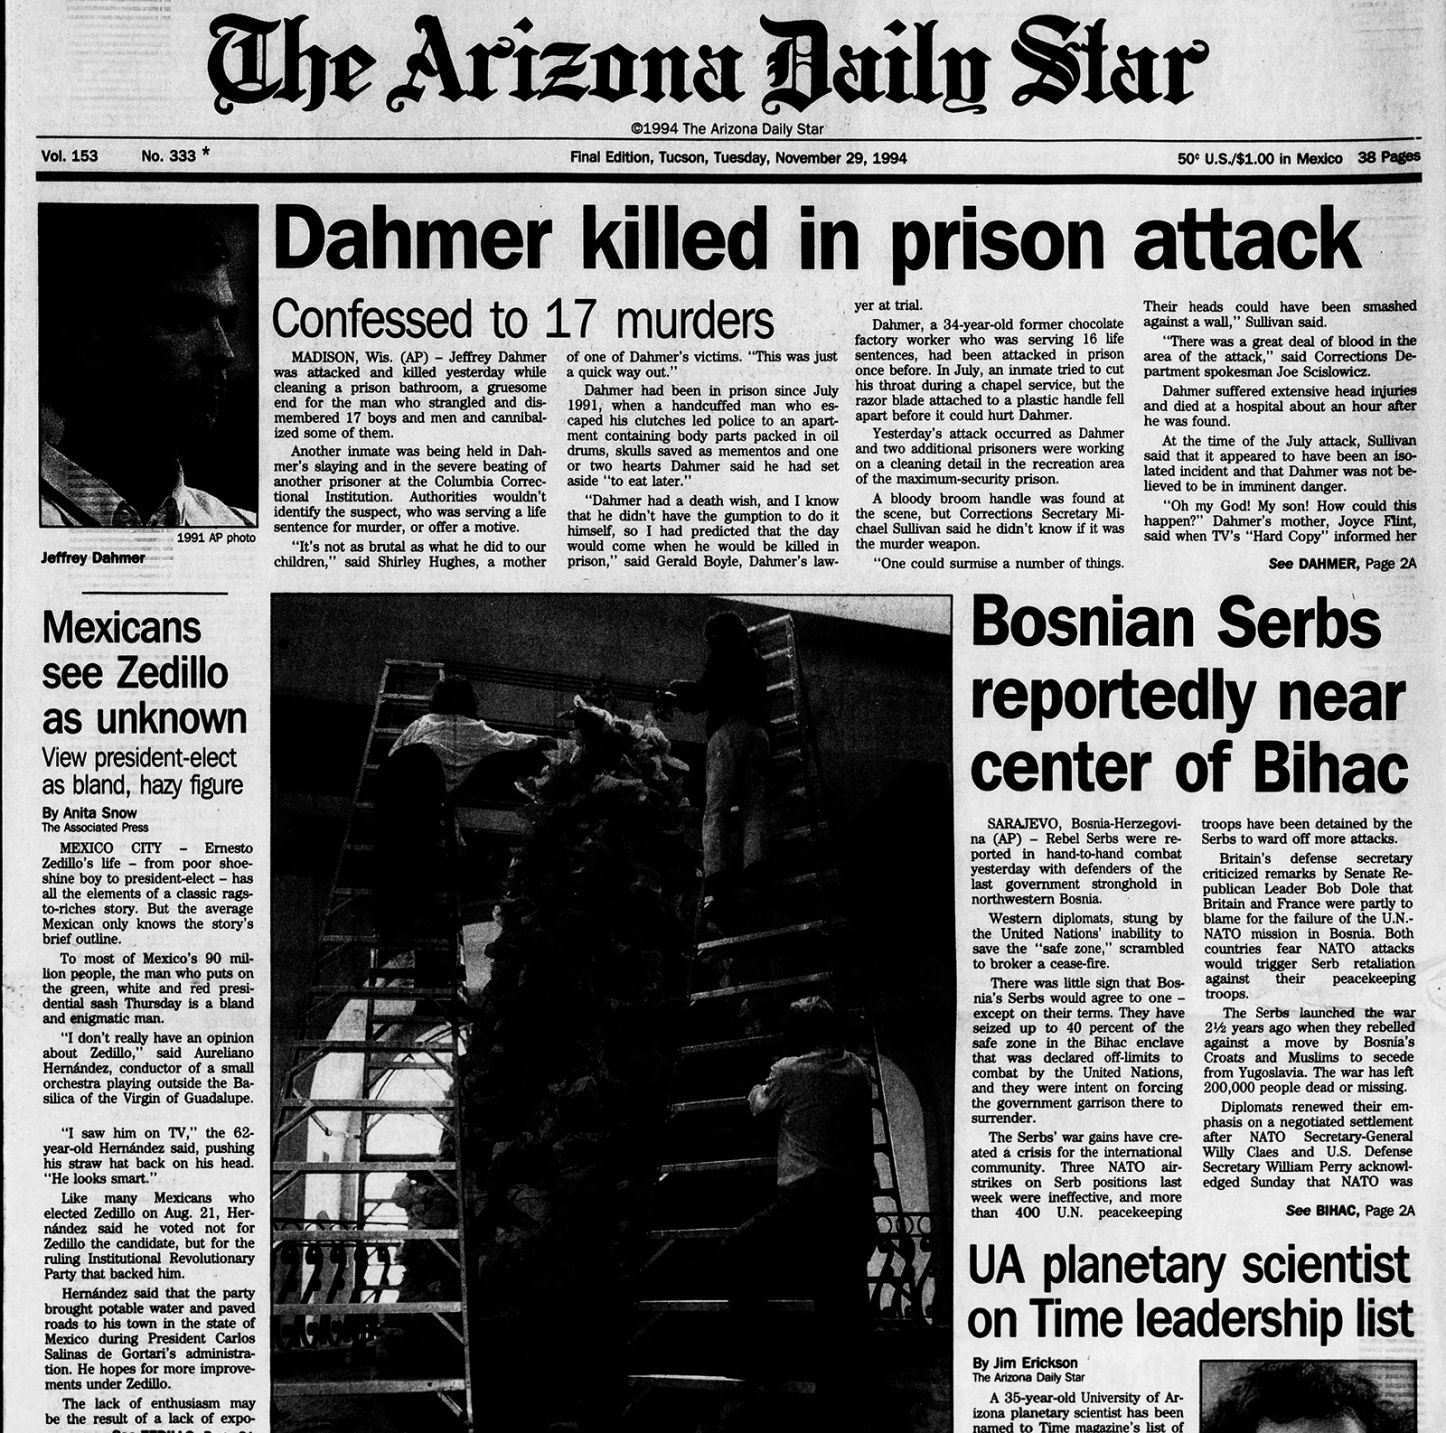 Nov. 29 Arizona Daily Star front pages: Dahmer killed in prison ...